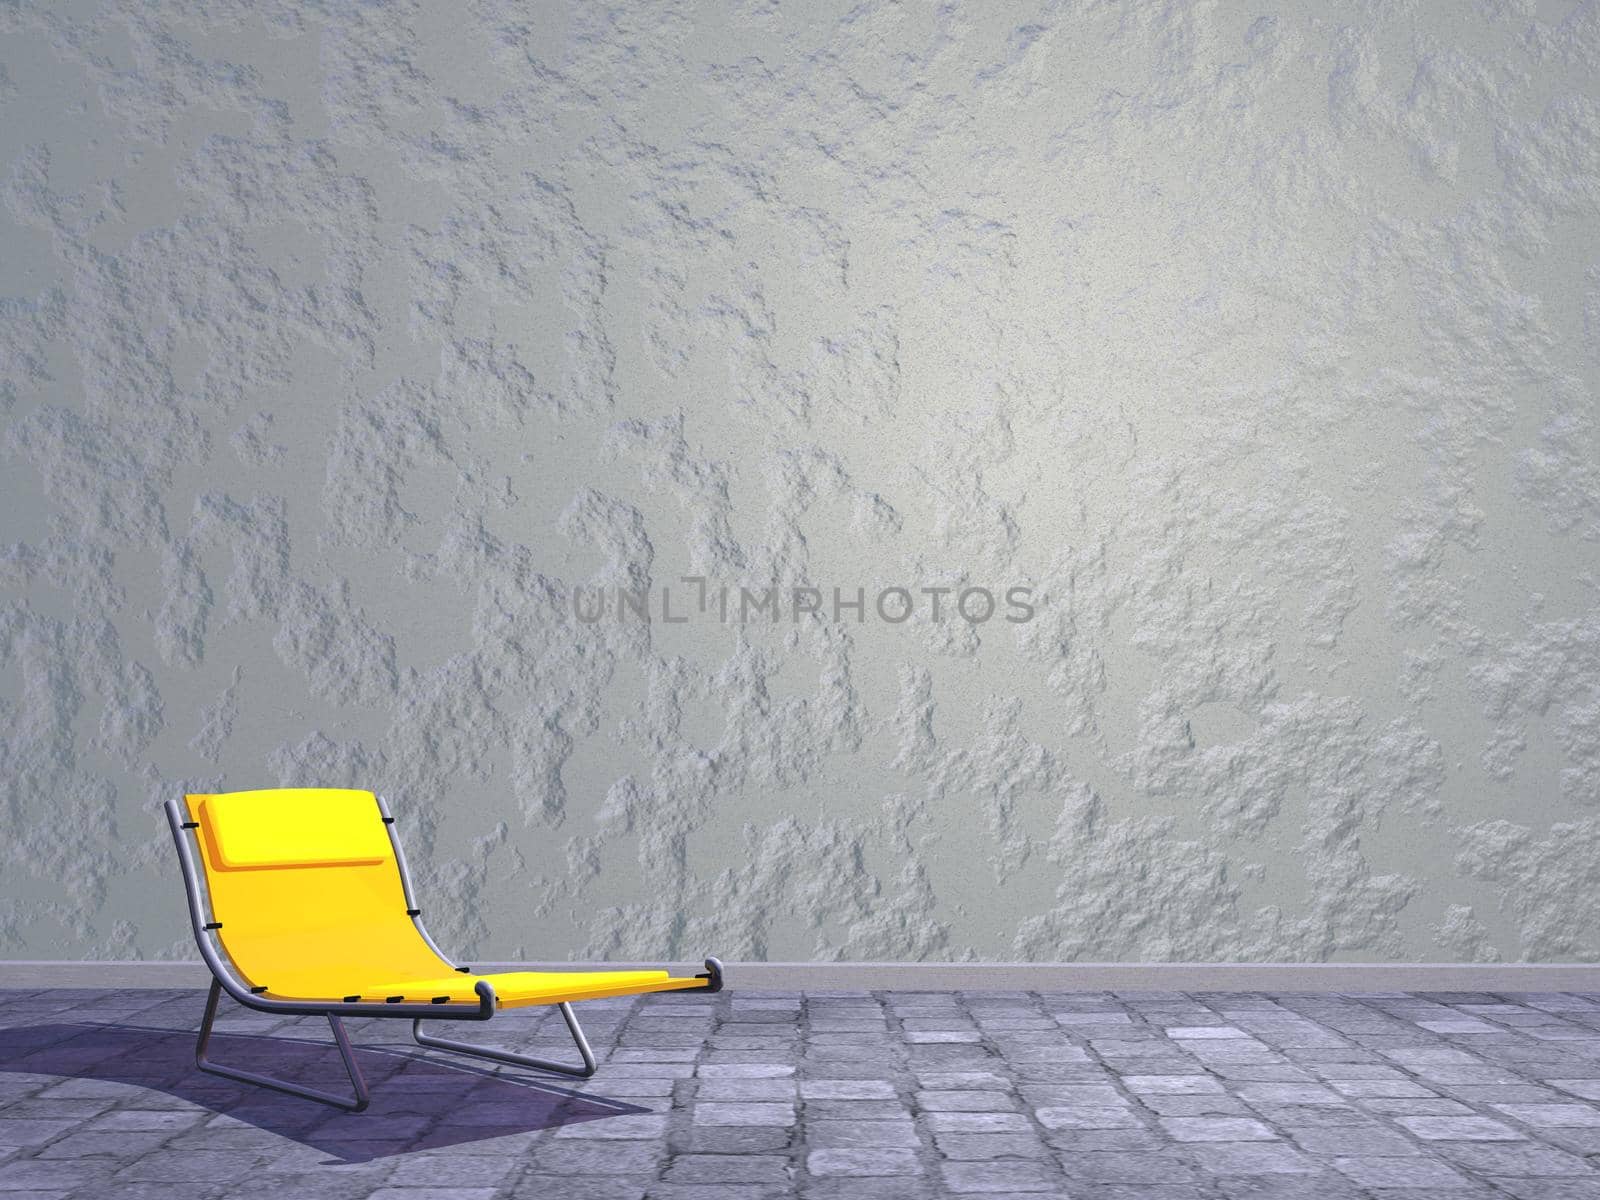 Yellow deck chair for relaxation in an old pavement city street